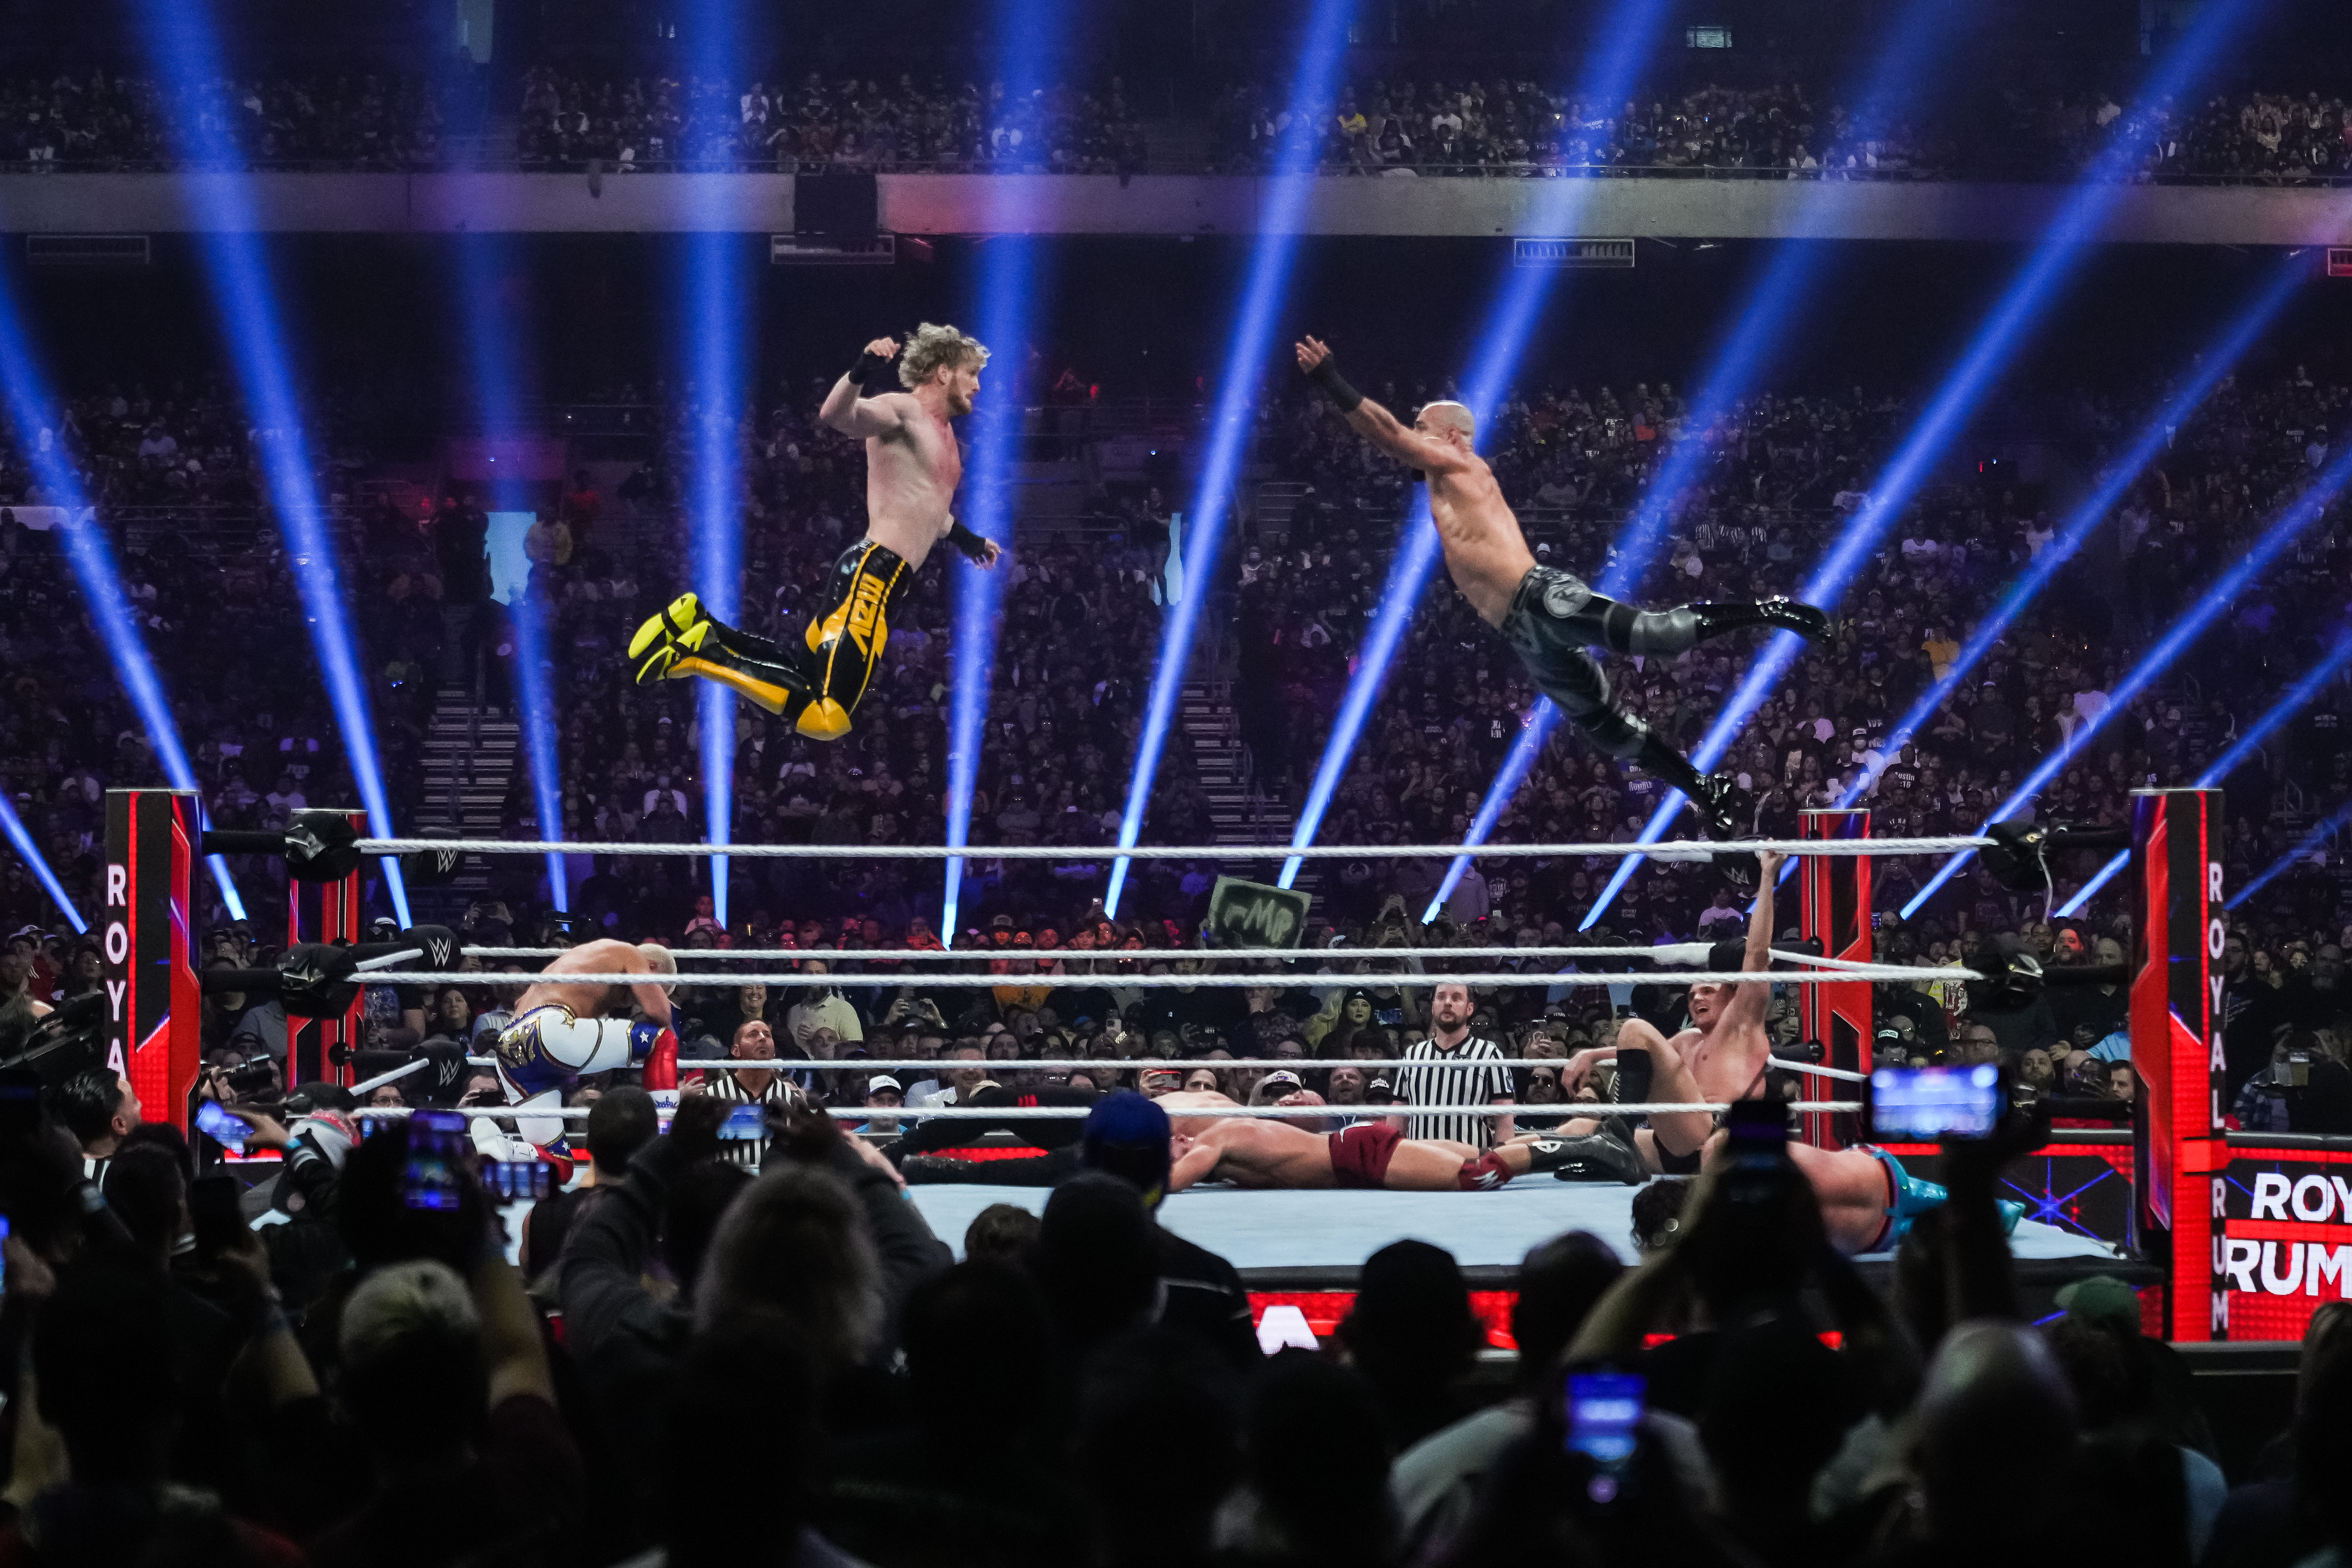 Logan Paul is most proud of his incredible midair collisions with Ricochet at the Royal Rumble